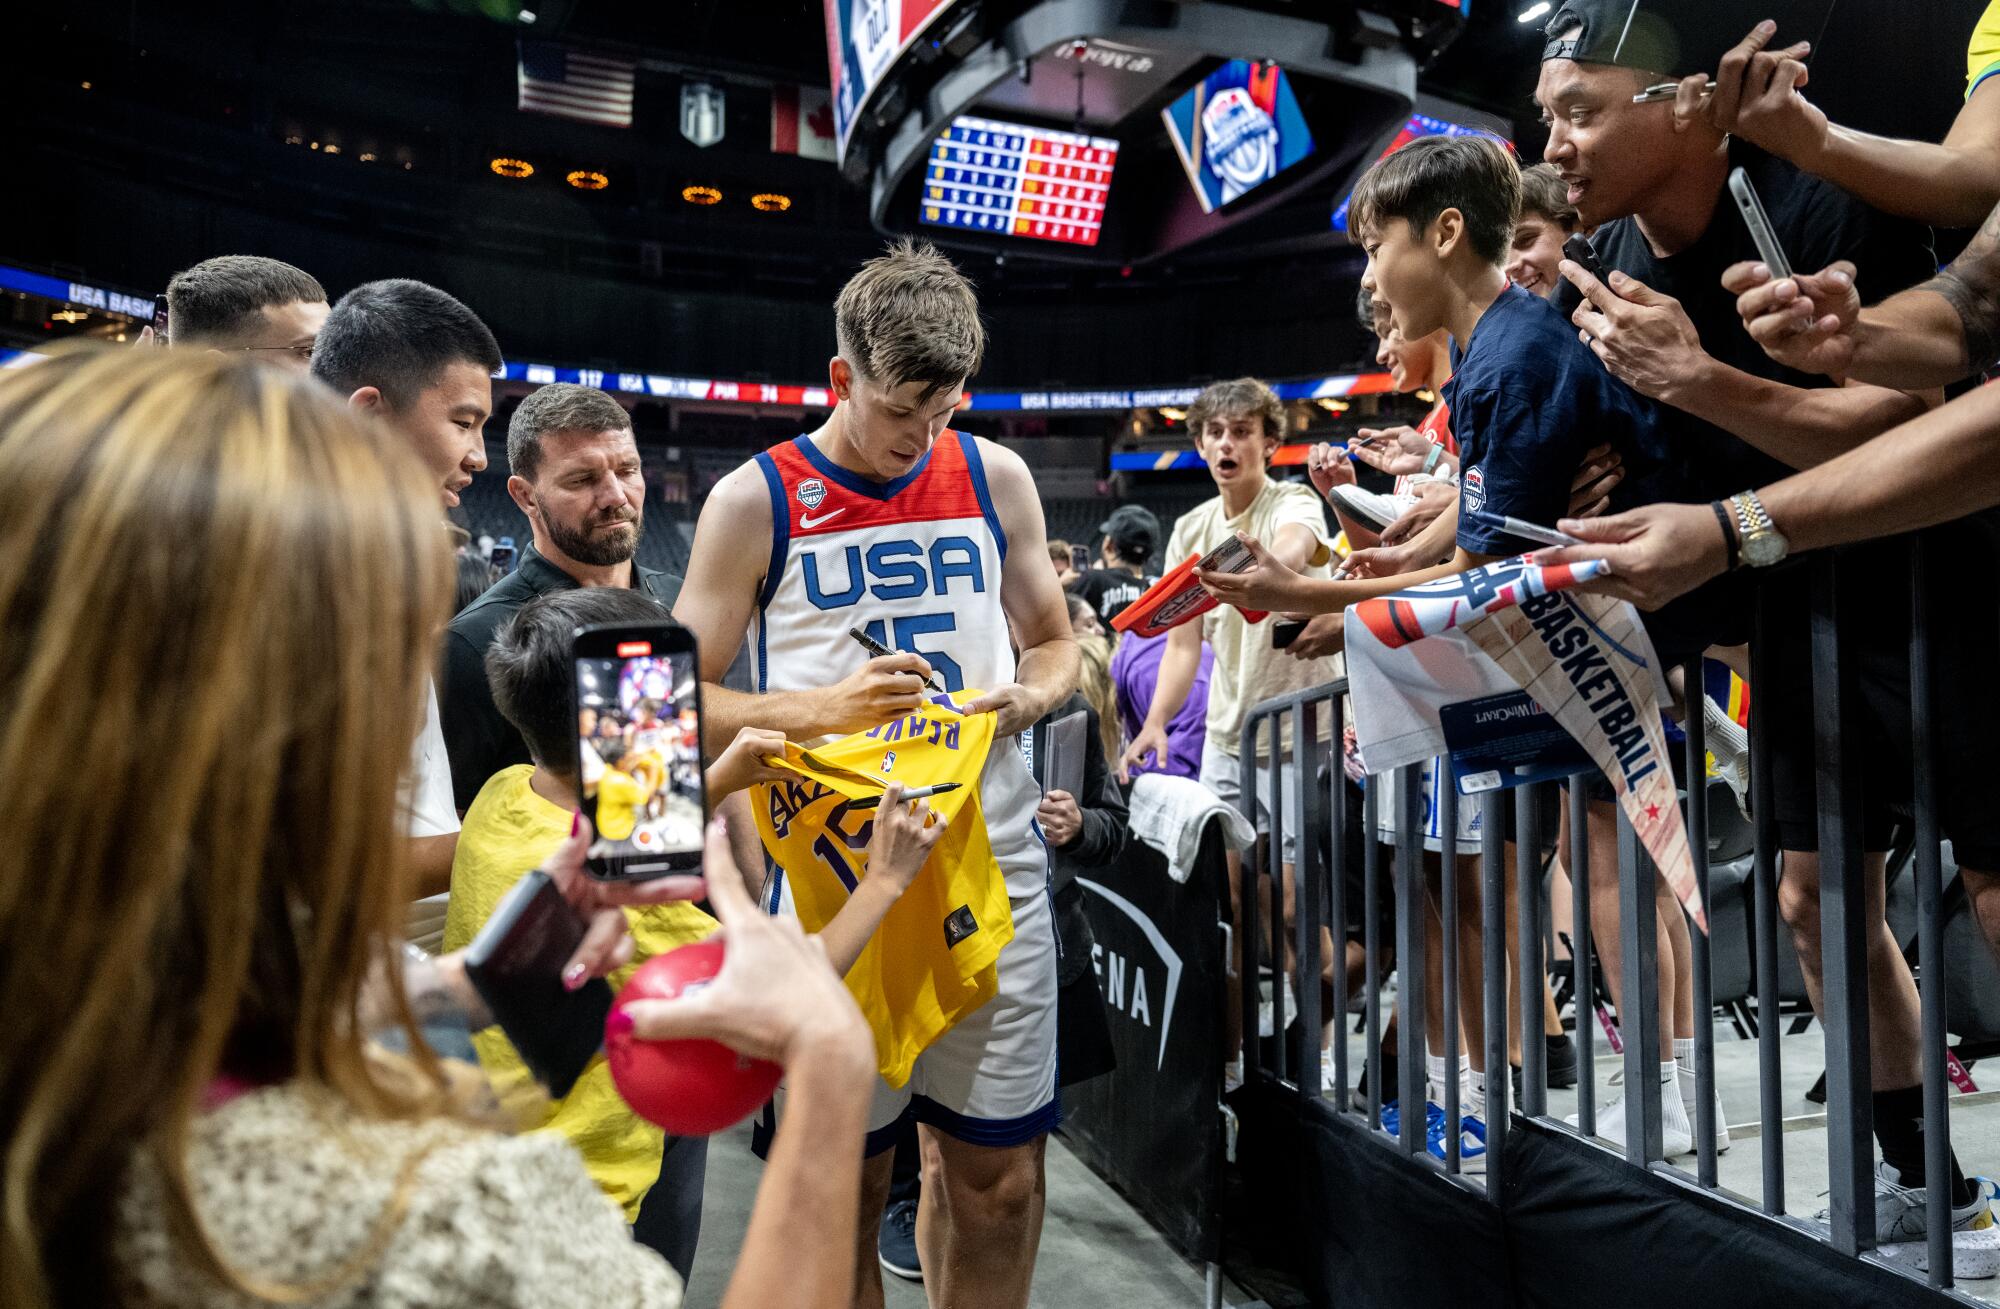 Team USA guard Austin Reaves signs a fan's Lakers jersey while leaving the court after an exhibition game in Las Vegas.